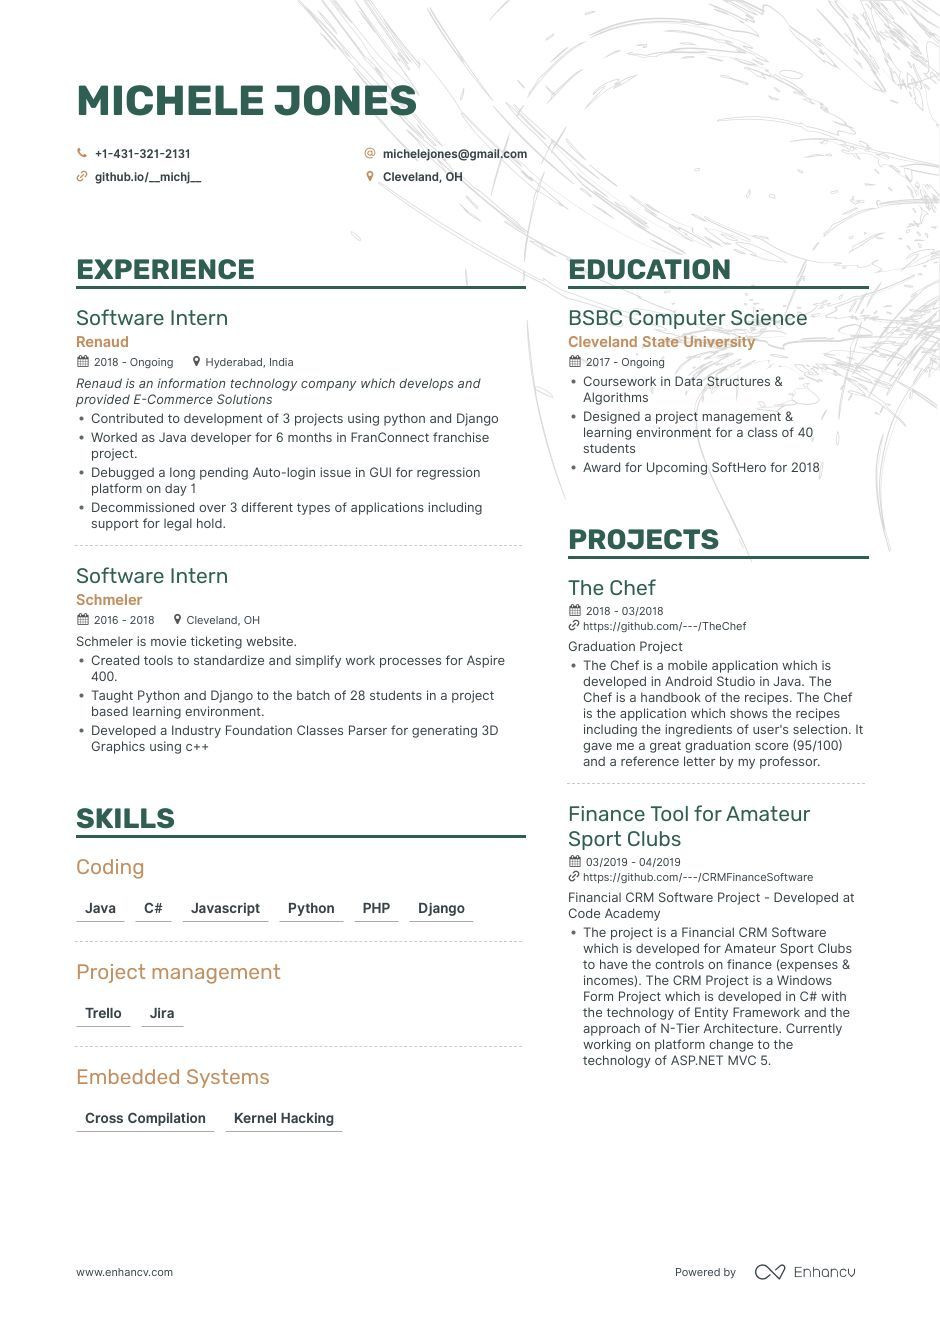 Software Engineer Job Resume Sample with 6 Years Experience software Engineer Resume Examples & Guide for 2022 (layout, Skills …